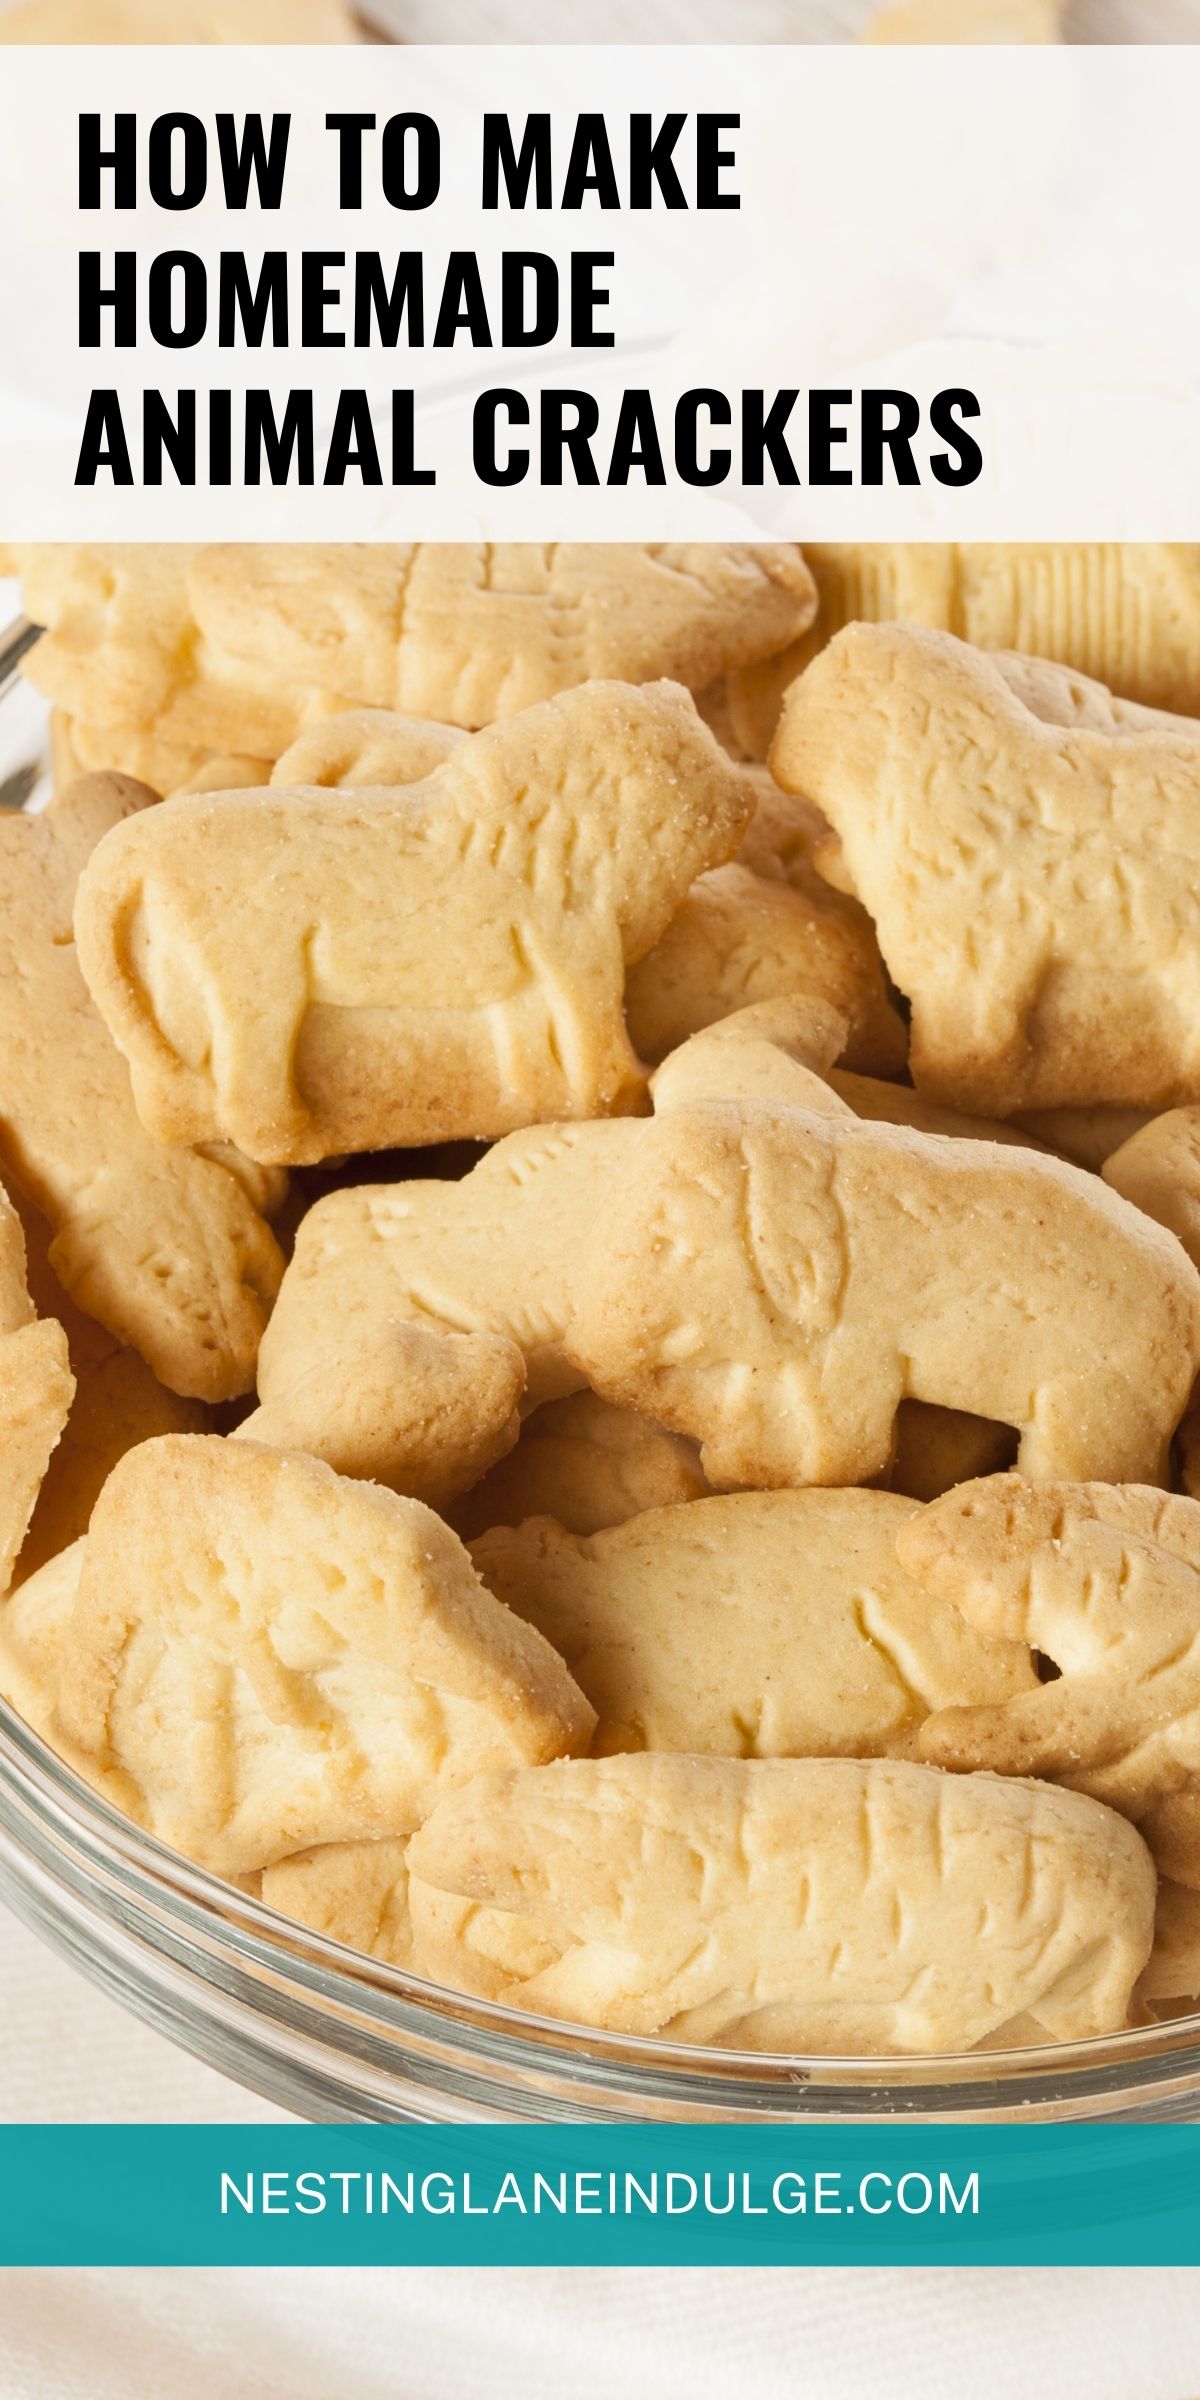 How to make homemade animal crackers graphic.